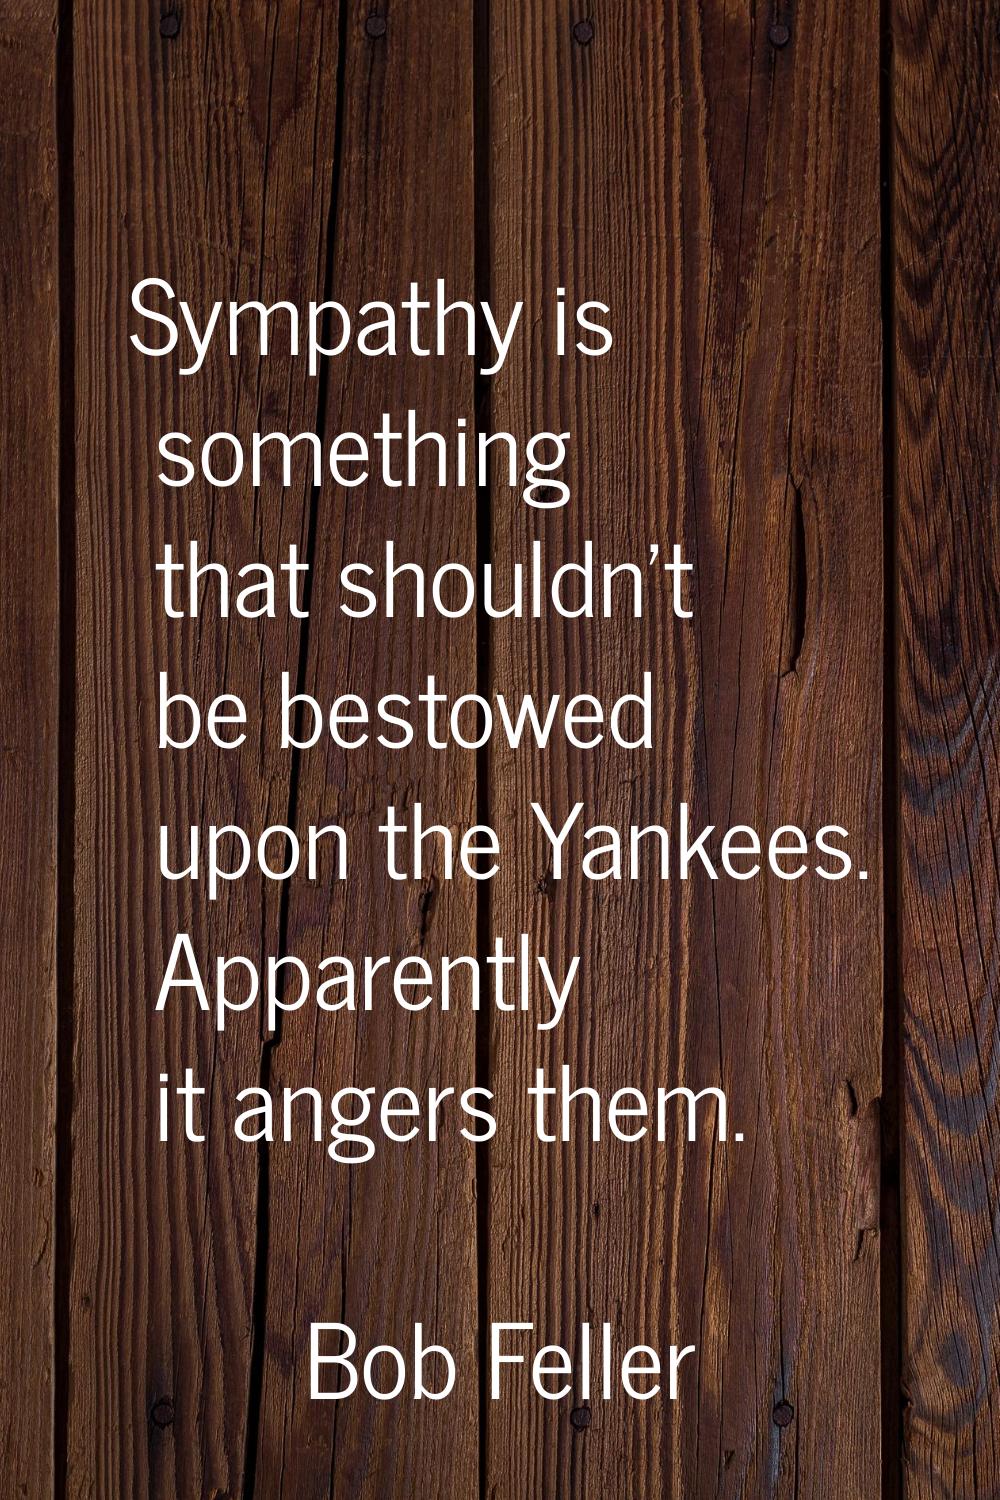 Sympathy is something that shouldn't be bestowed upon the Yankees. Apparently it angers them.